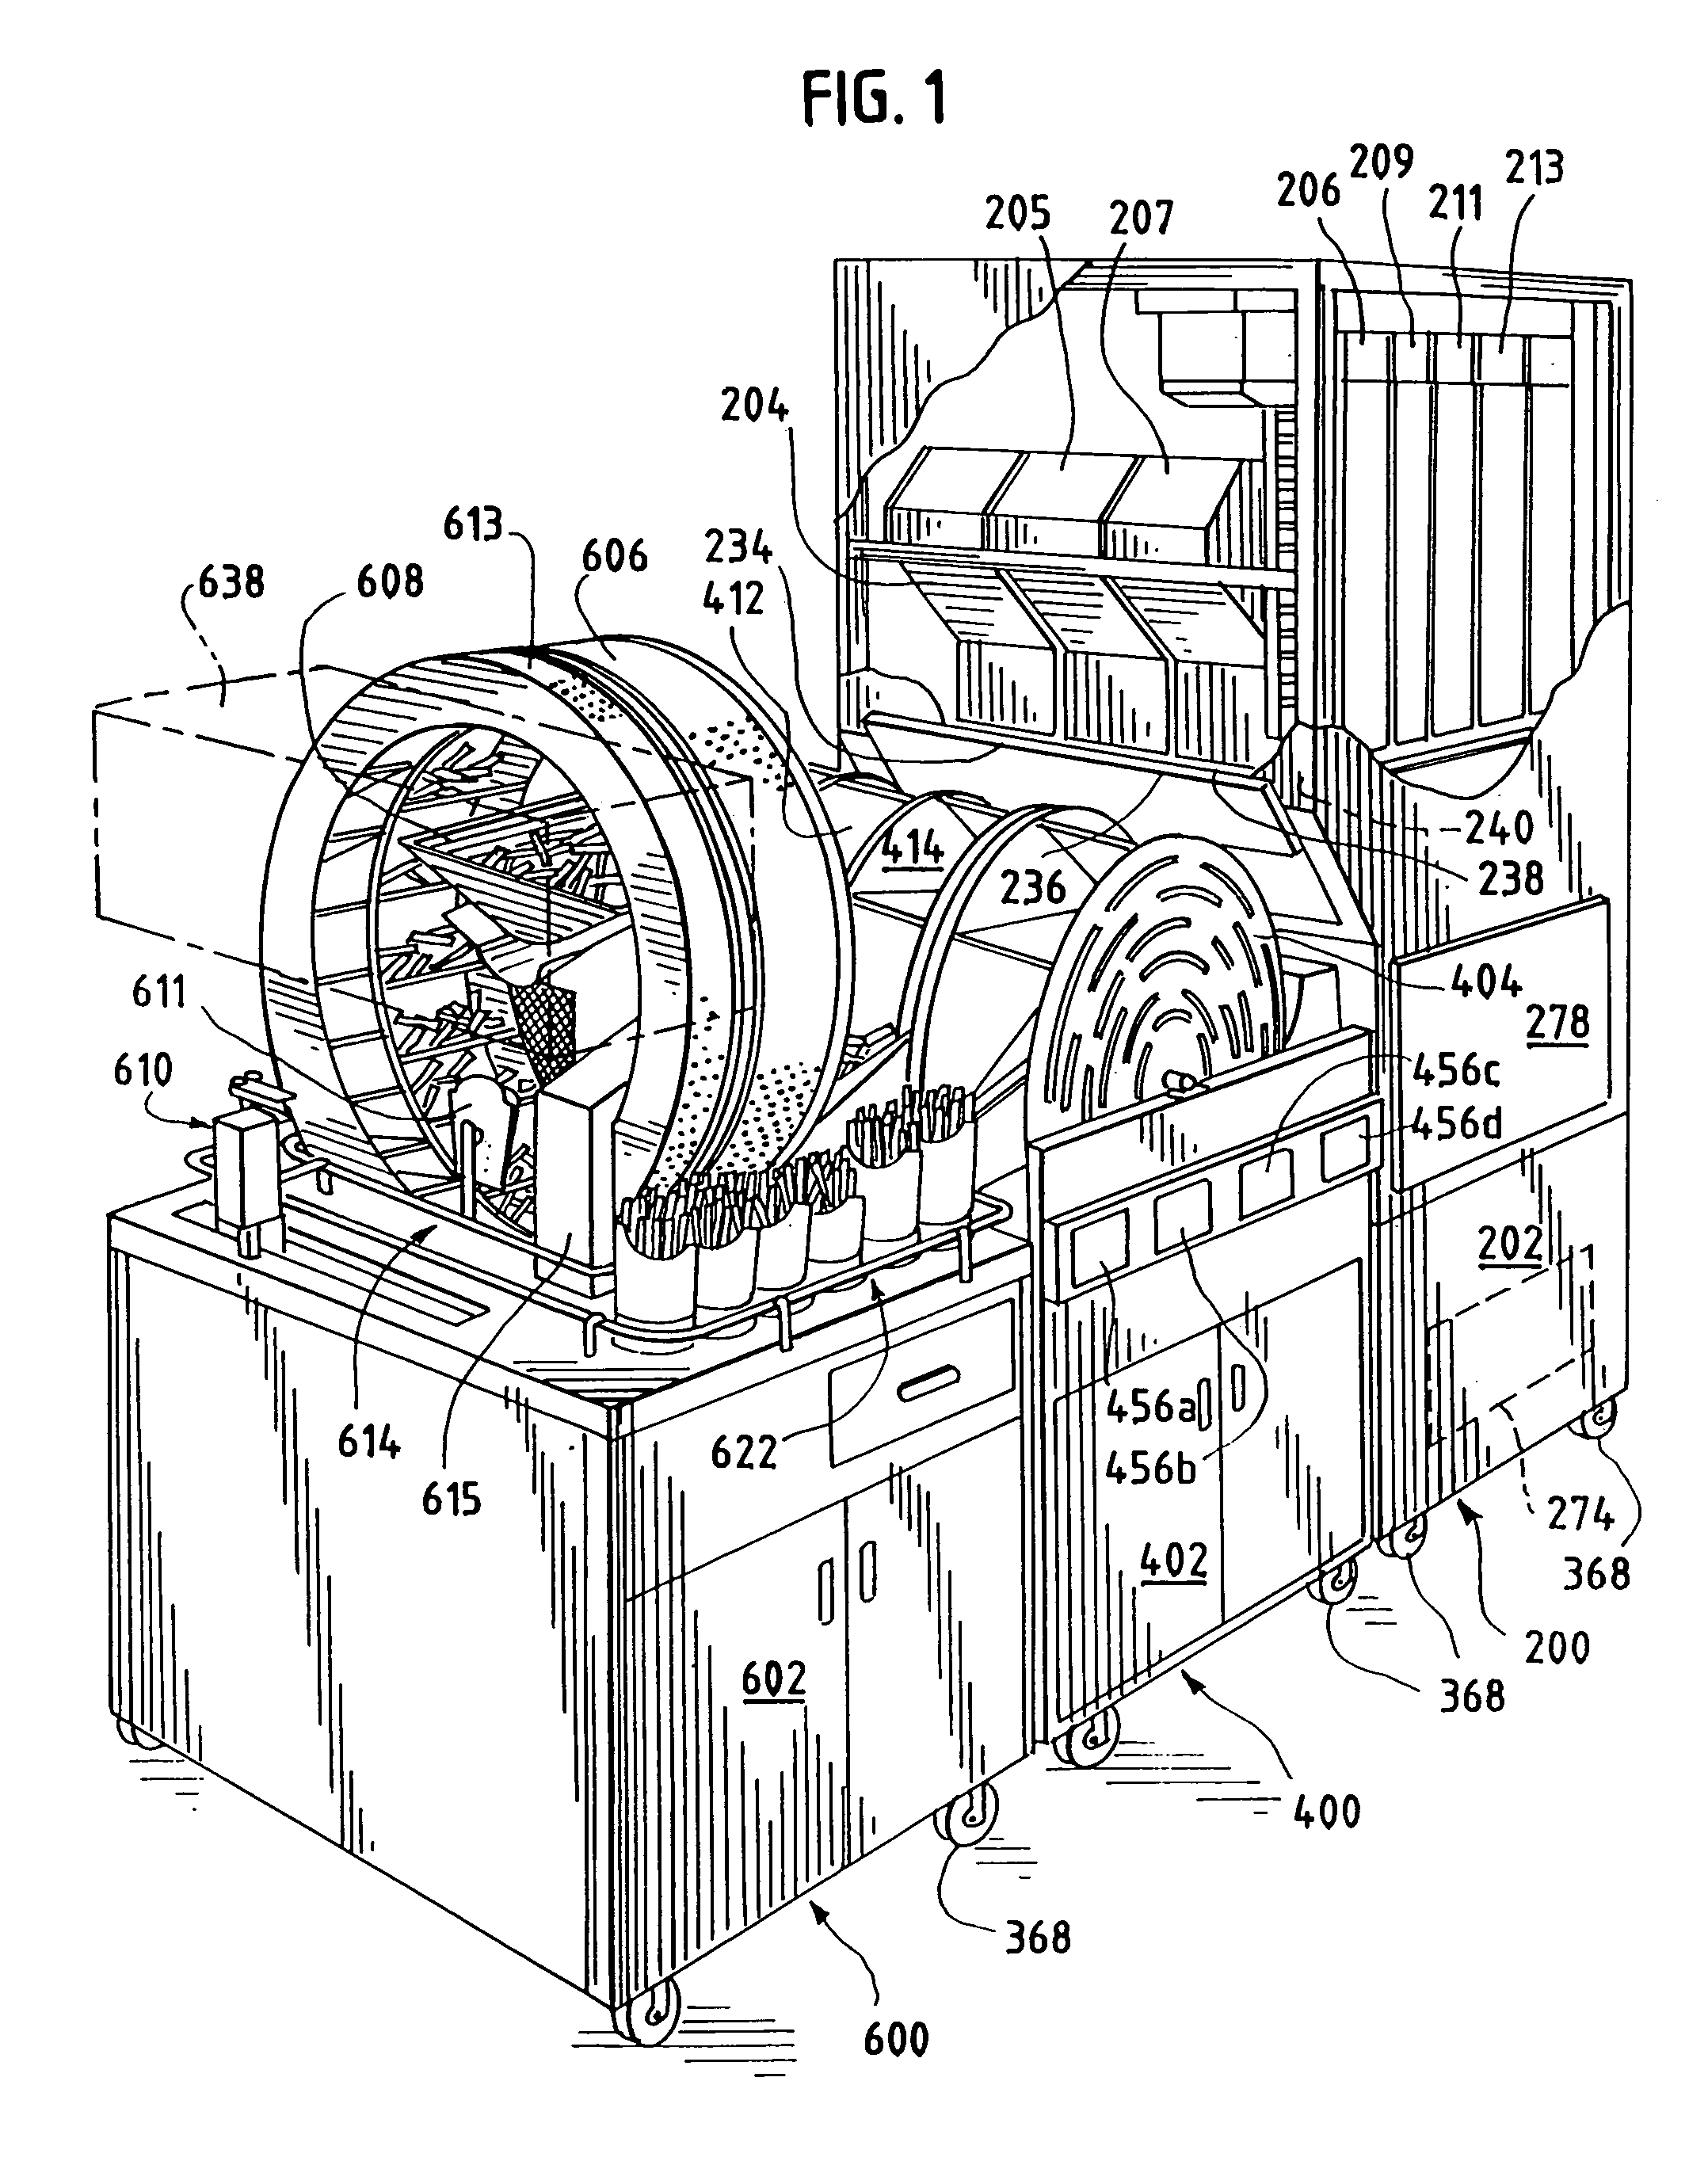 Food dispensing device and method